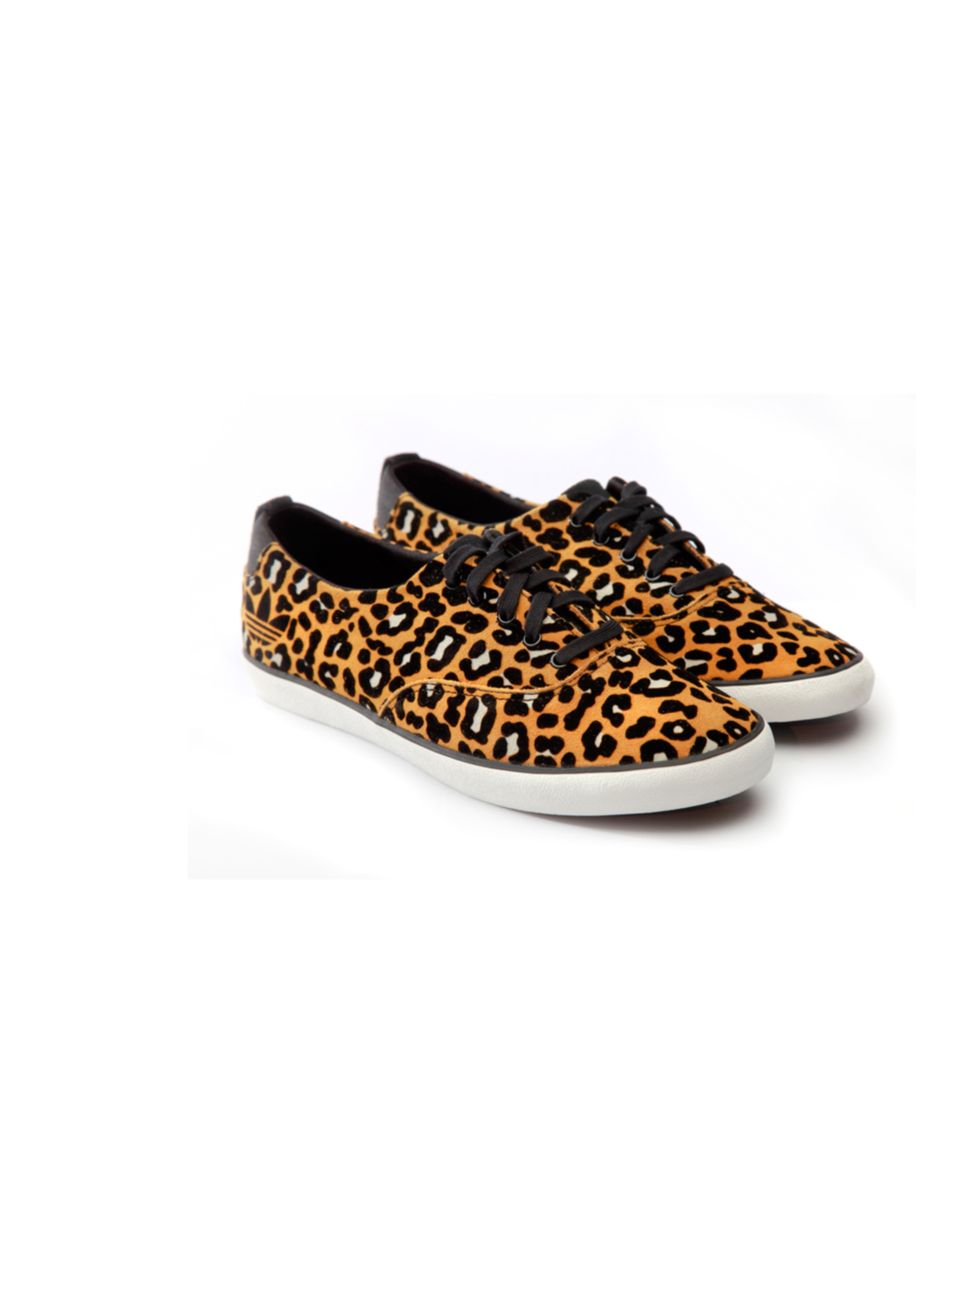 <p>Liven up your off-duty wardrobe in a flash with these cute leopard print pumps. As good now with jeans and knits as they will be with denim cuts offs and skater skirts next year <a href="http://www.adidas.co.uk/Women%27s-Azurine-Low-Ld-Shoes/G60991_54